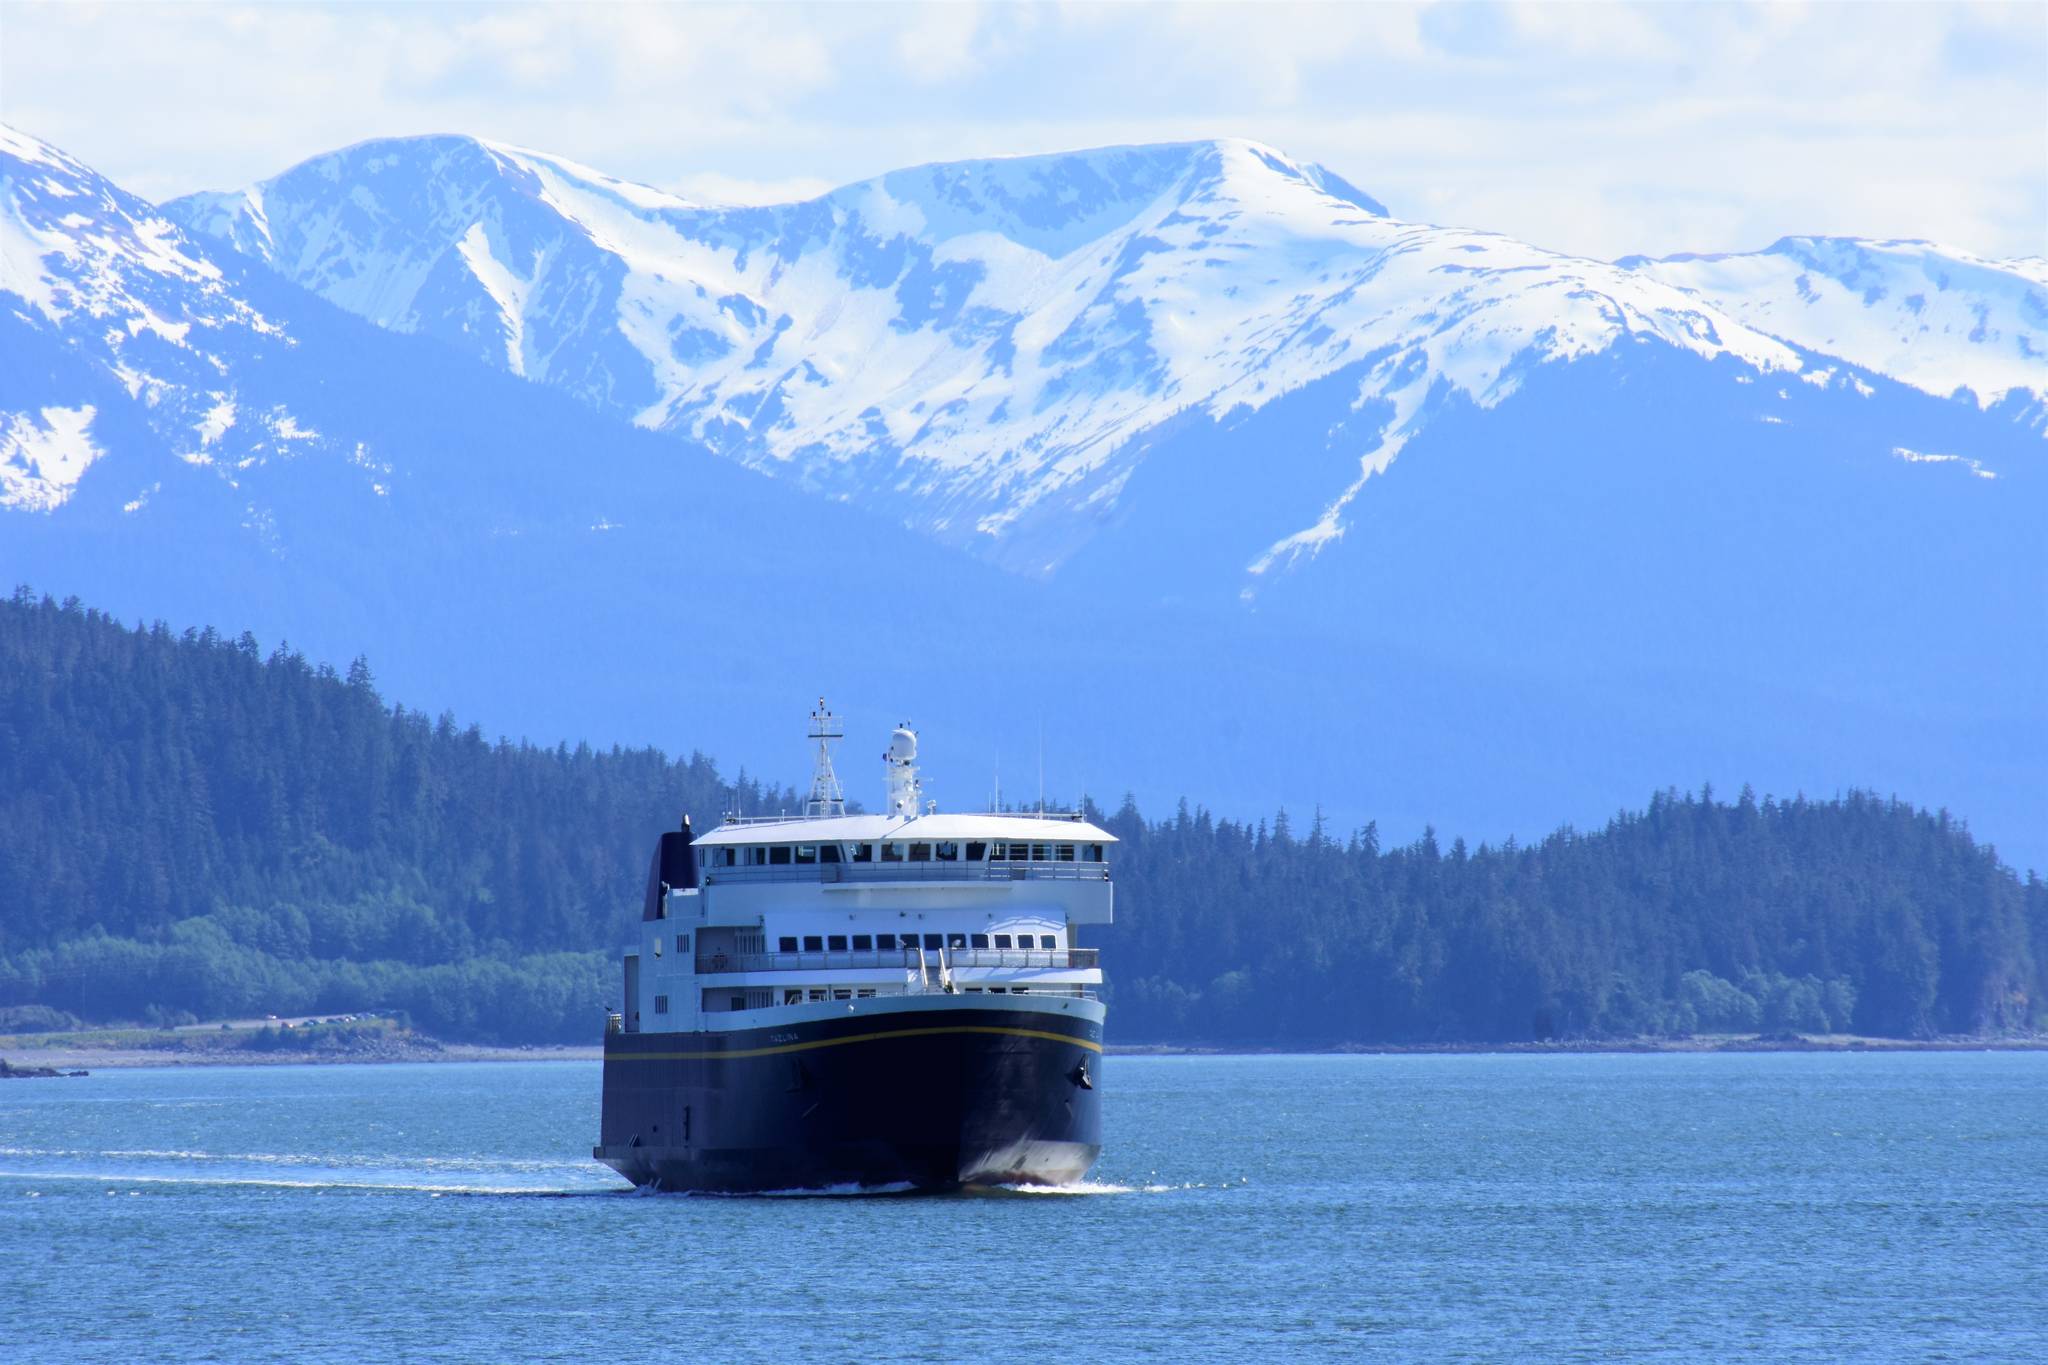 The M/V Tazlina arrives in Juneau on Saturday, May 16, 2020. (Peter Segall / Juneau Empire File)